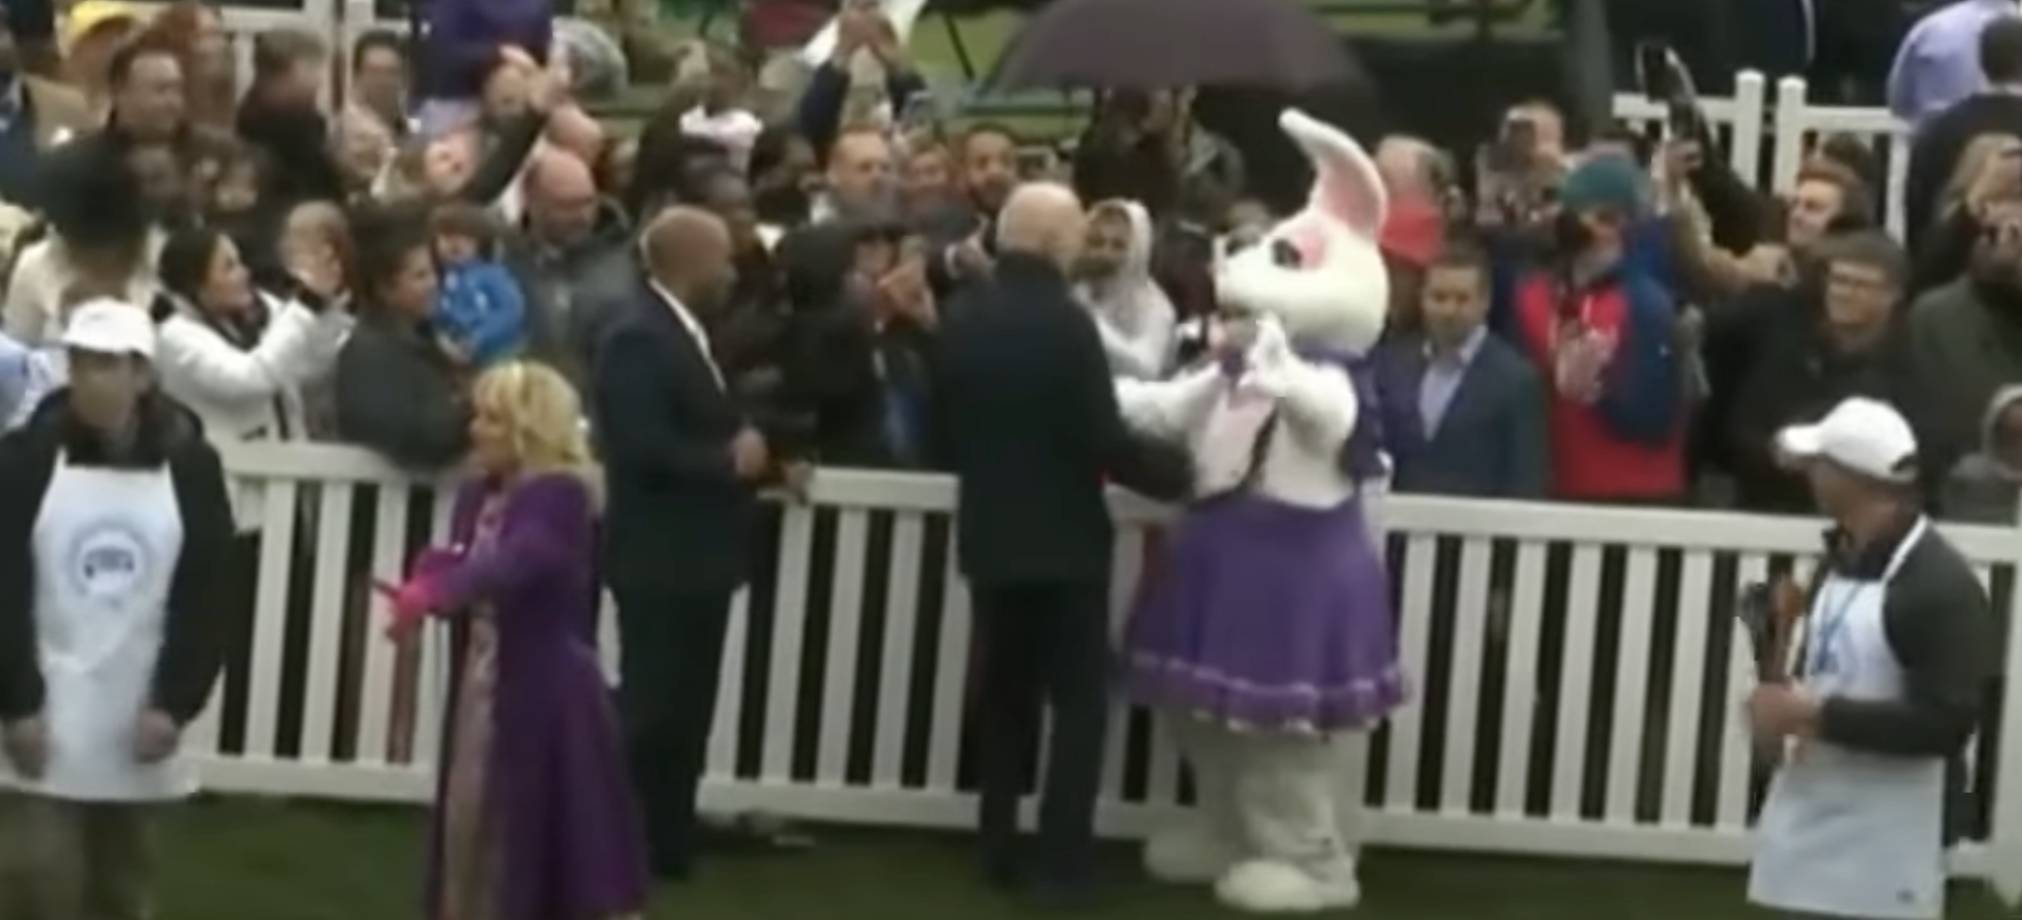 Featured image for “Can the White Rabbit Save Biden Democrats From the Witch of November?”